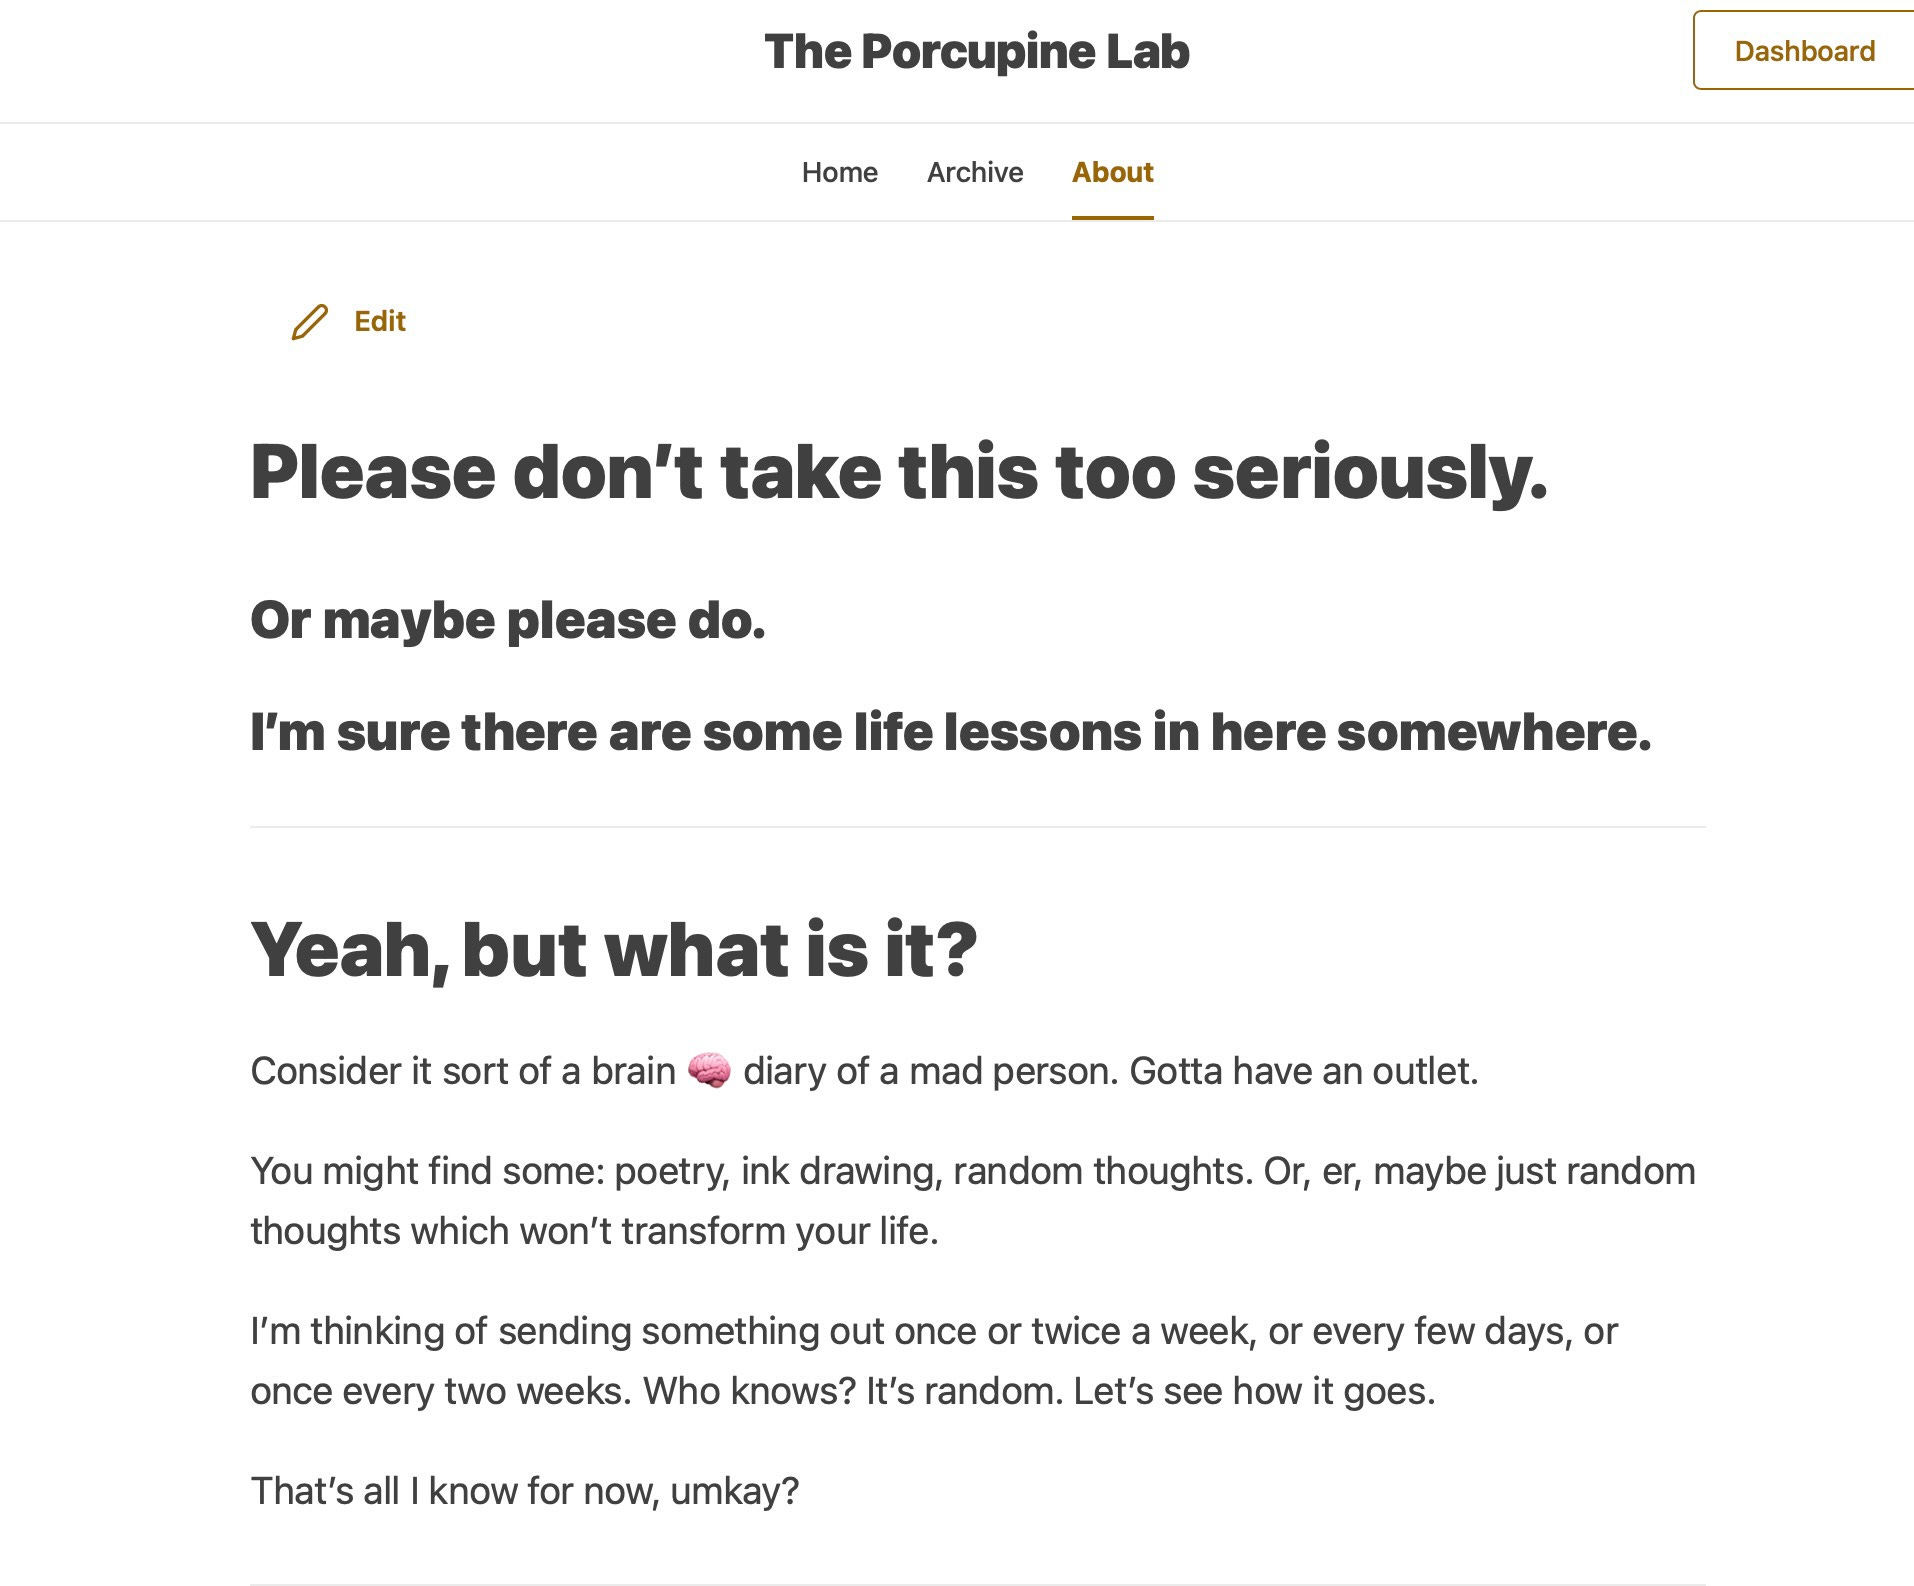 image: screenshot of The Porcupine Lab About page. text reads Please don’t take this too seriously.  Or maybe please do.  I’m sure there are some life lessons in here somewhere.  Yeah, but what is it?  Consider it sort of a brain 🧠 diary of a mad person. Gotta have an outlet.  You might find some: poetry, ink drawing, random thoughts. Or, er, maybe just random thoughts which won’t transform your life.  I’m thinking of sending something out once or twice a week, or every few days, or once every two weeks. Who knows? It’s random. Let’s see how it goes.  That’s all I know for now, umkay?